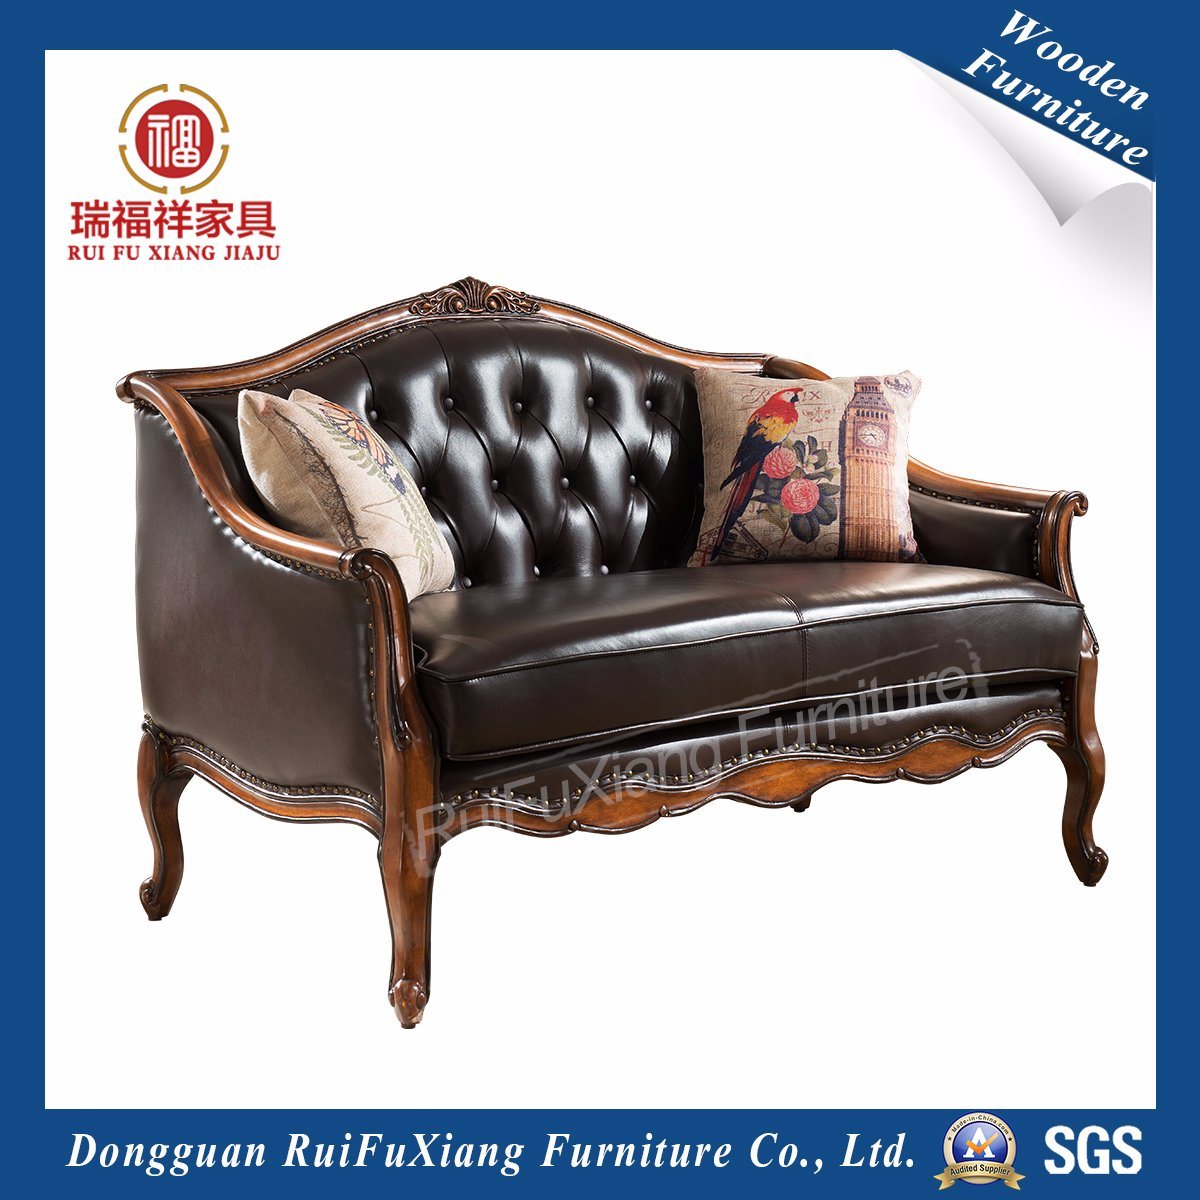 N311 Ruifuxiang Living Room Furniture Leather Sofa with Birch Frame